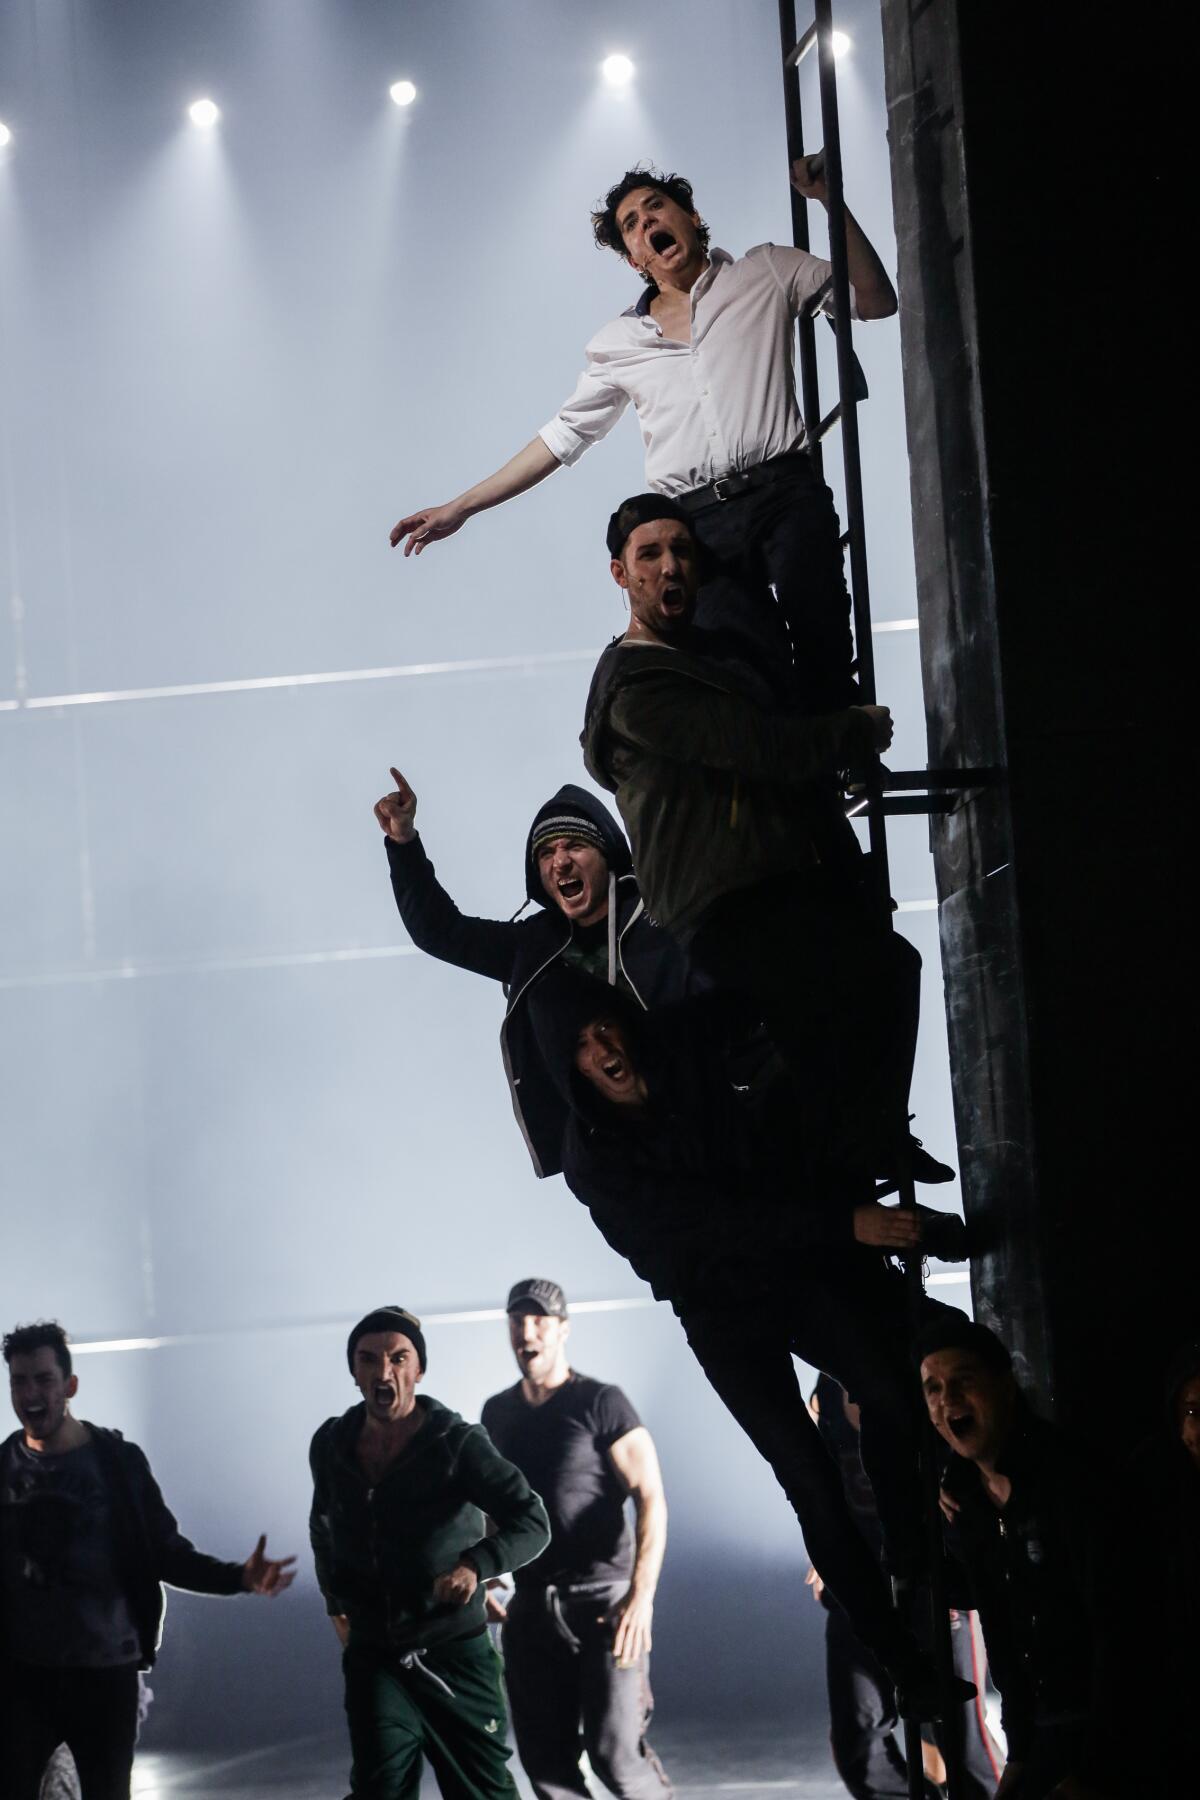 Group scene with Tansel Akzeybek (white shirt) during rehearsals for 'West Side Story' at Komische Oper Berlin